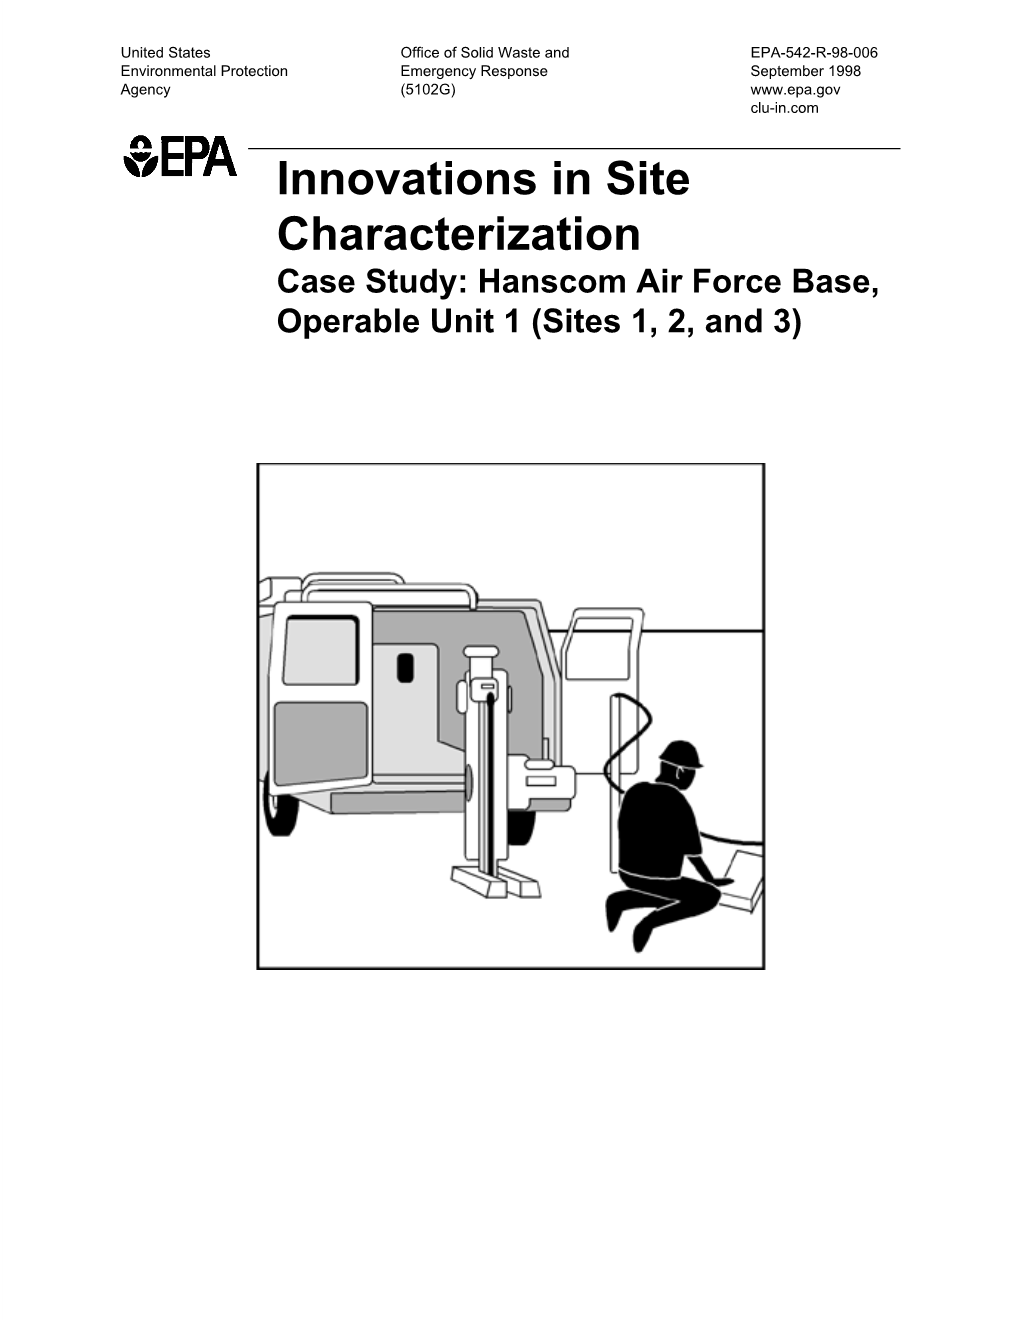 Hanscom Air Force Base Operable Unit 1 (Sites 1, 2, and 3)